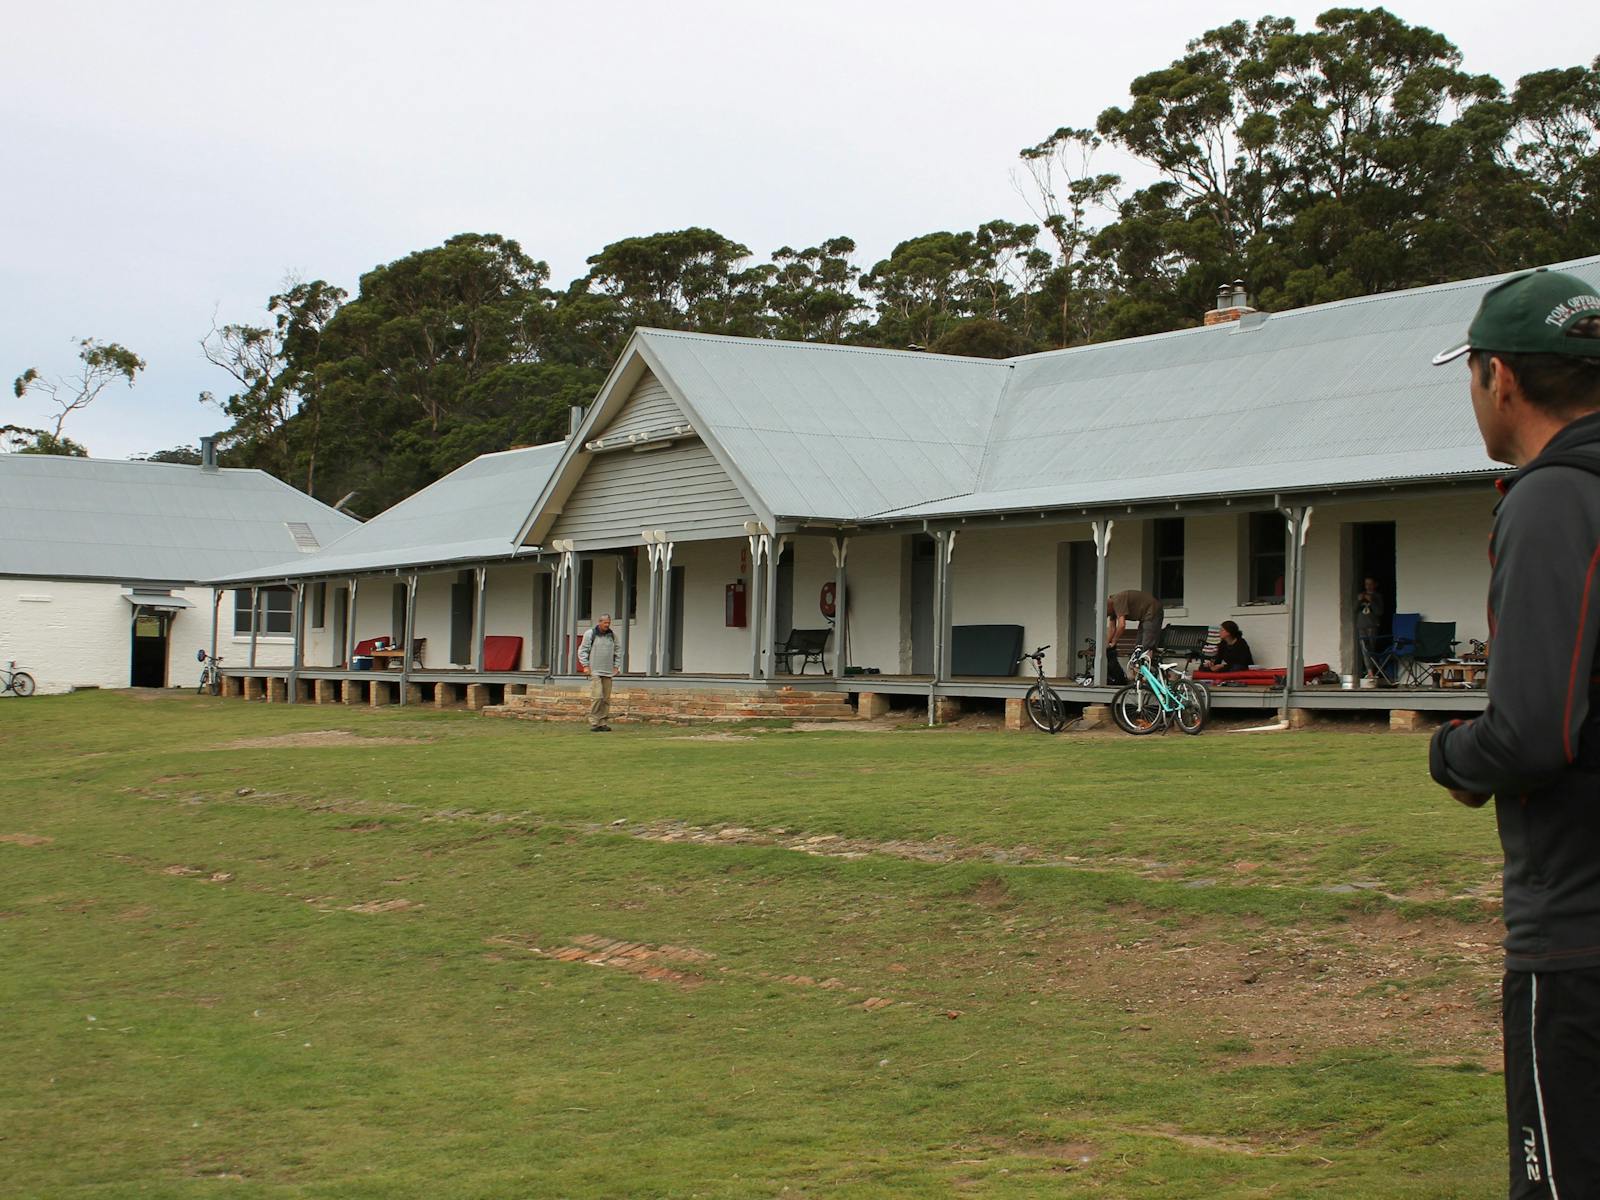 The Convict Penitentiary from the early 1800's on the Maria Island Walk by Life's An Adventure